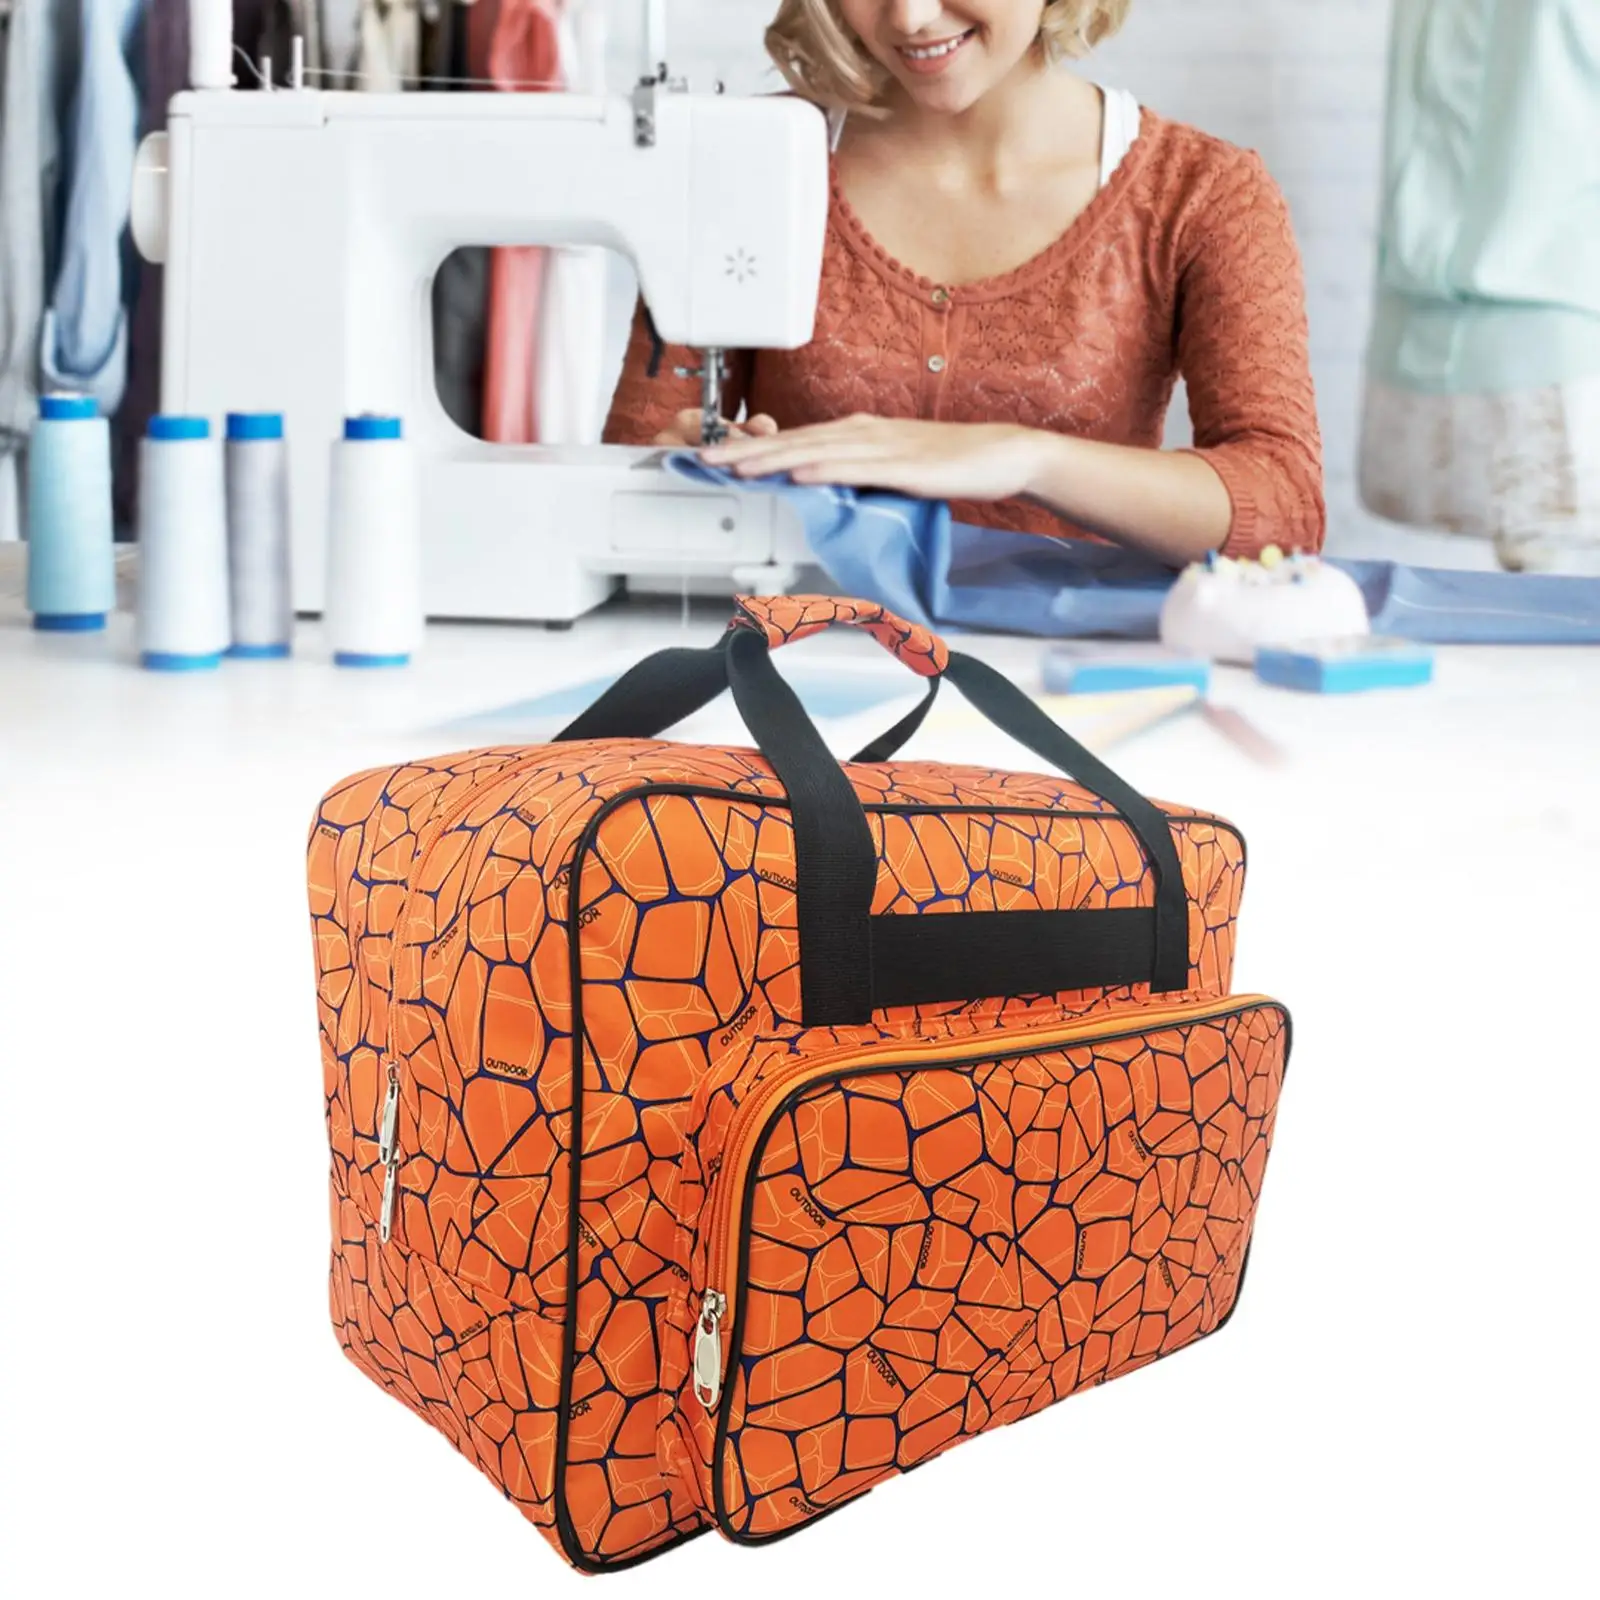 Multi-Functional Sewing Machine Carrying Case Home Nylon Travel Handbag ,Sew Accessories Large Capacity  Pocket